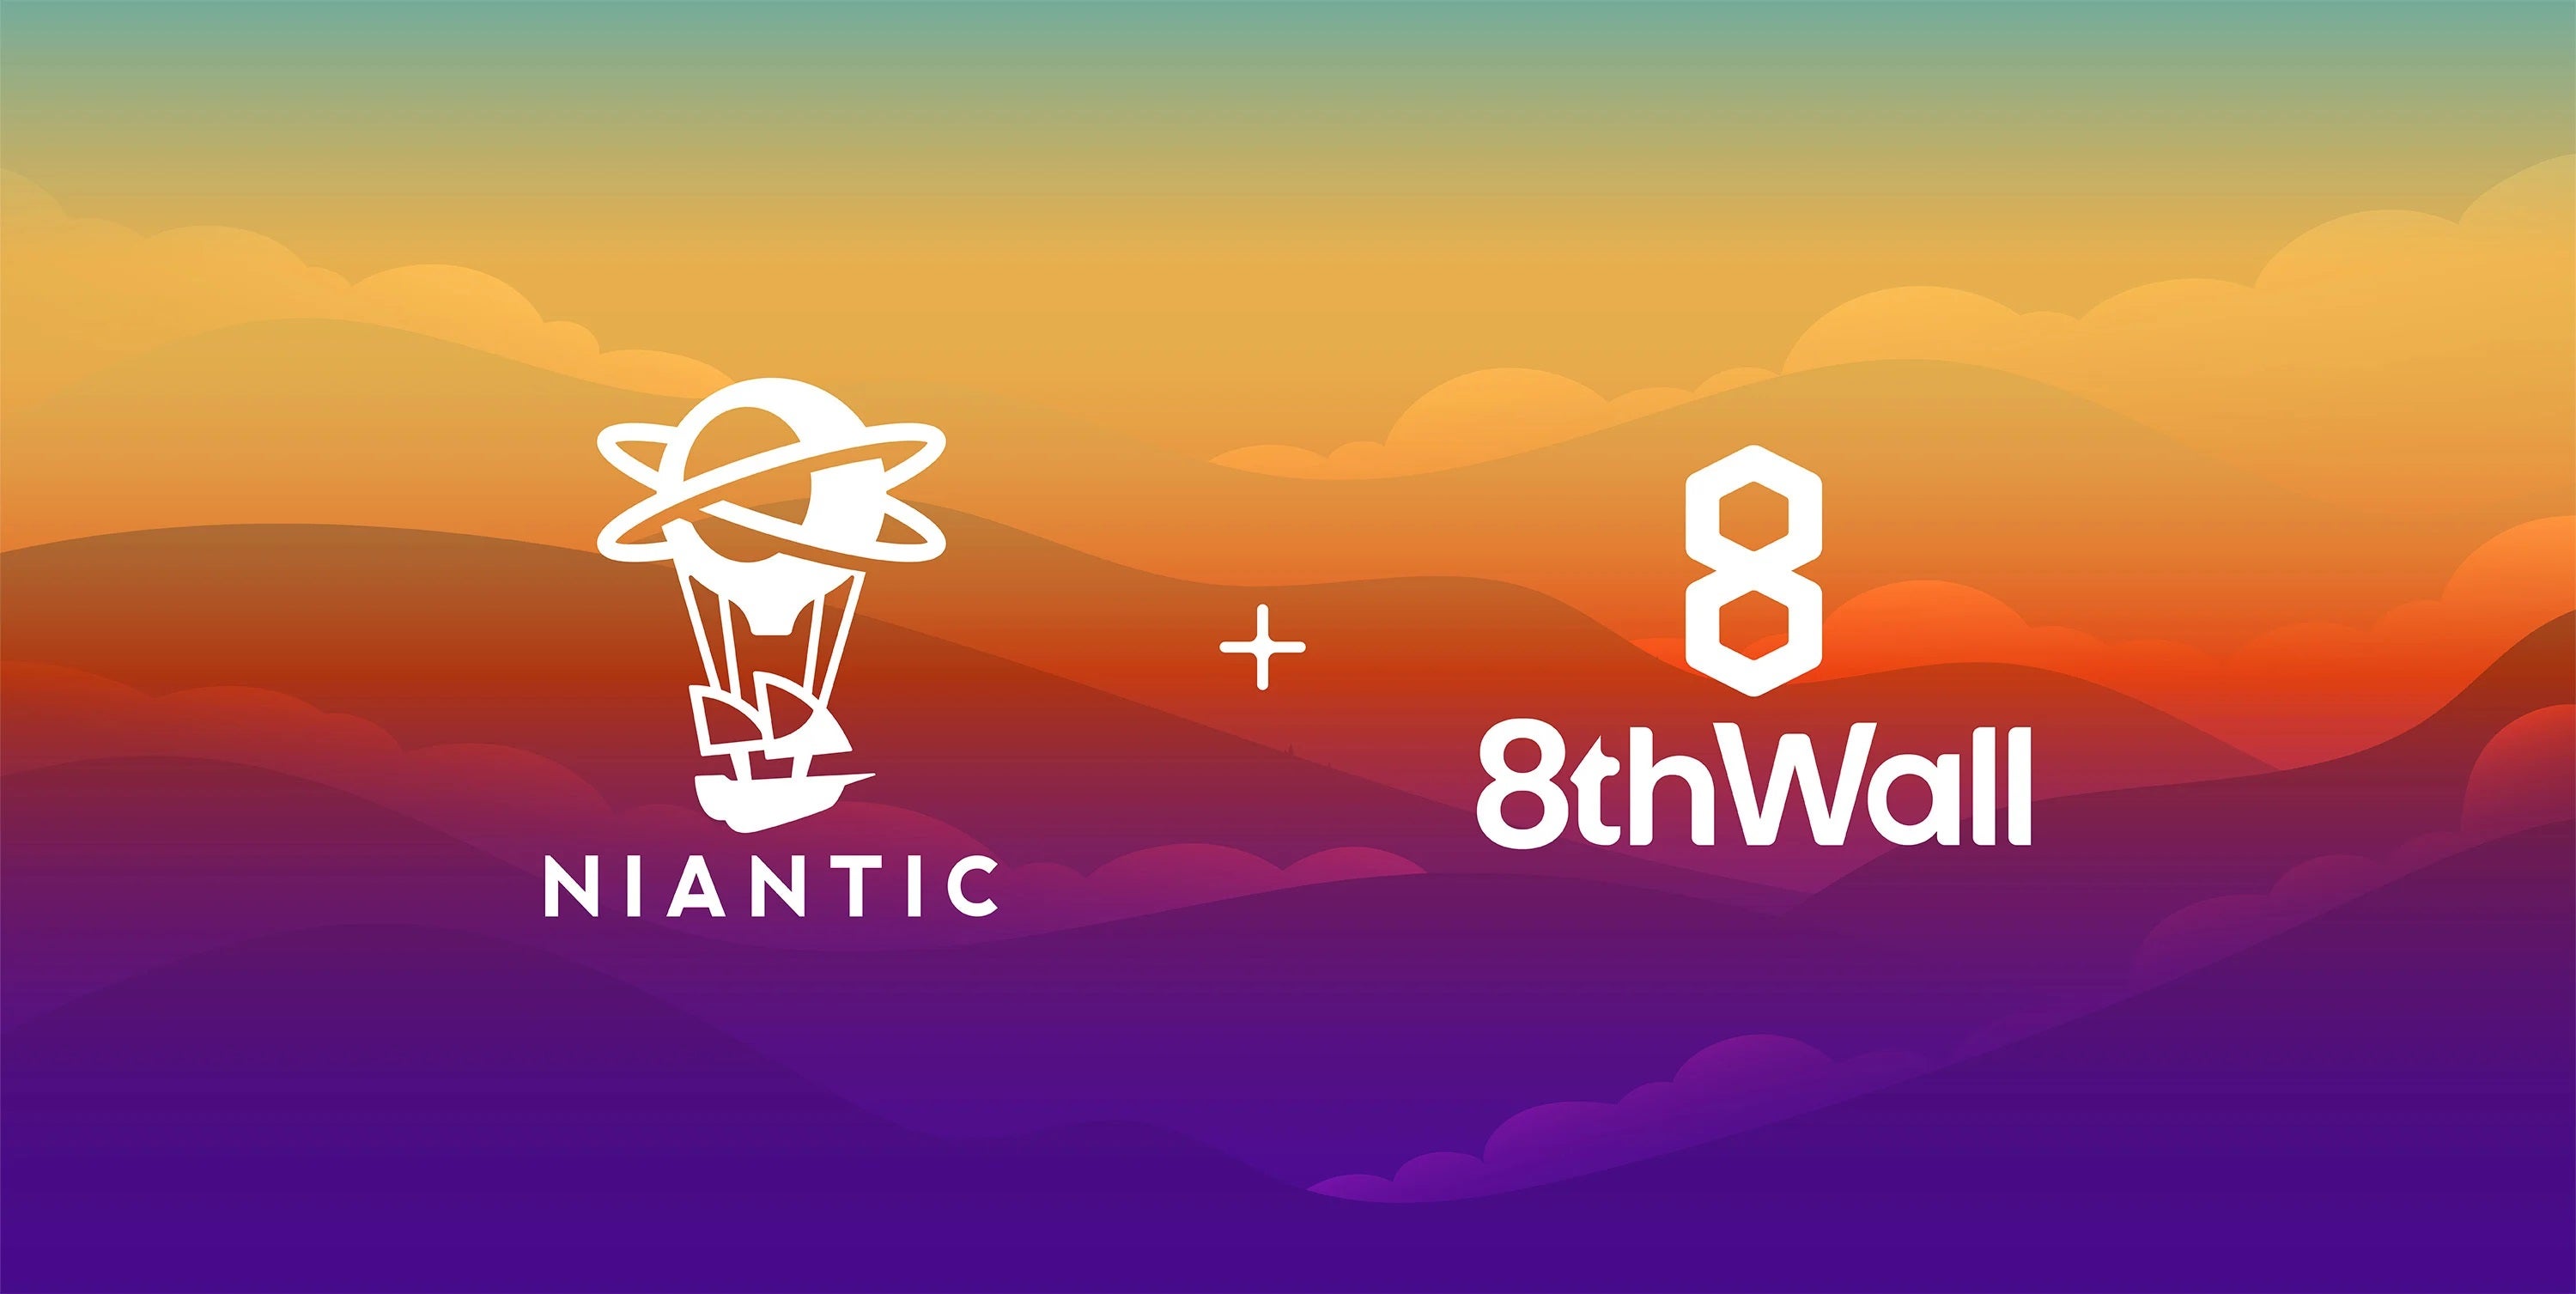 Image for Niantic acquires 8th Wall